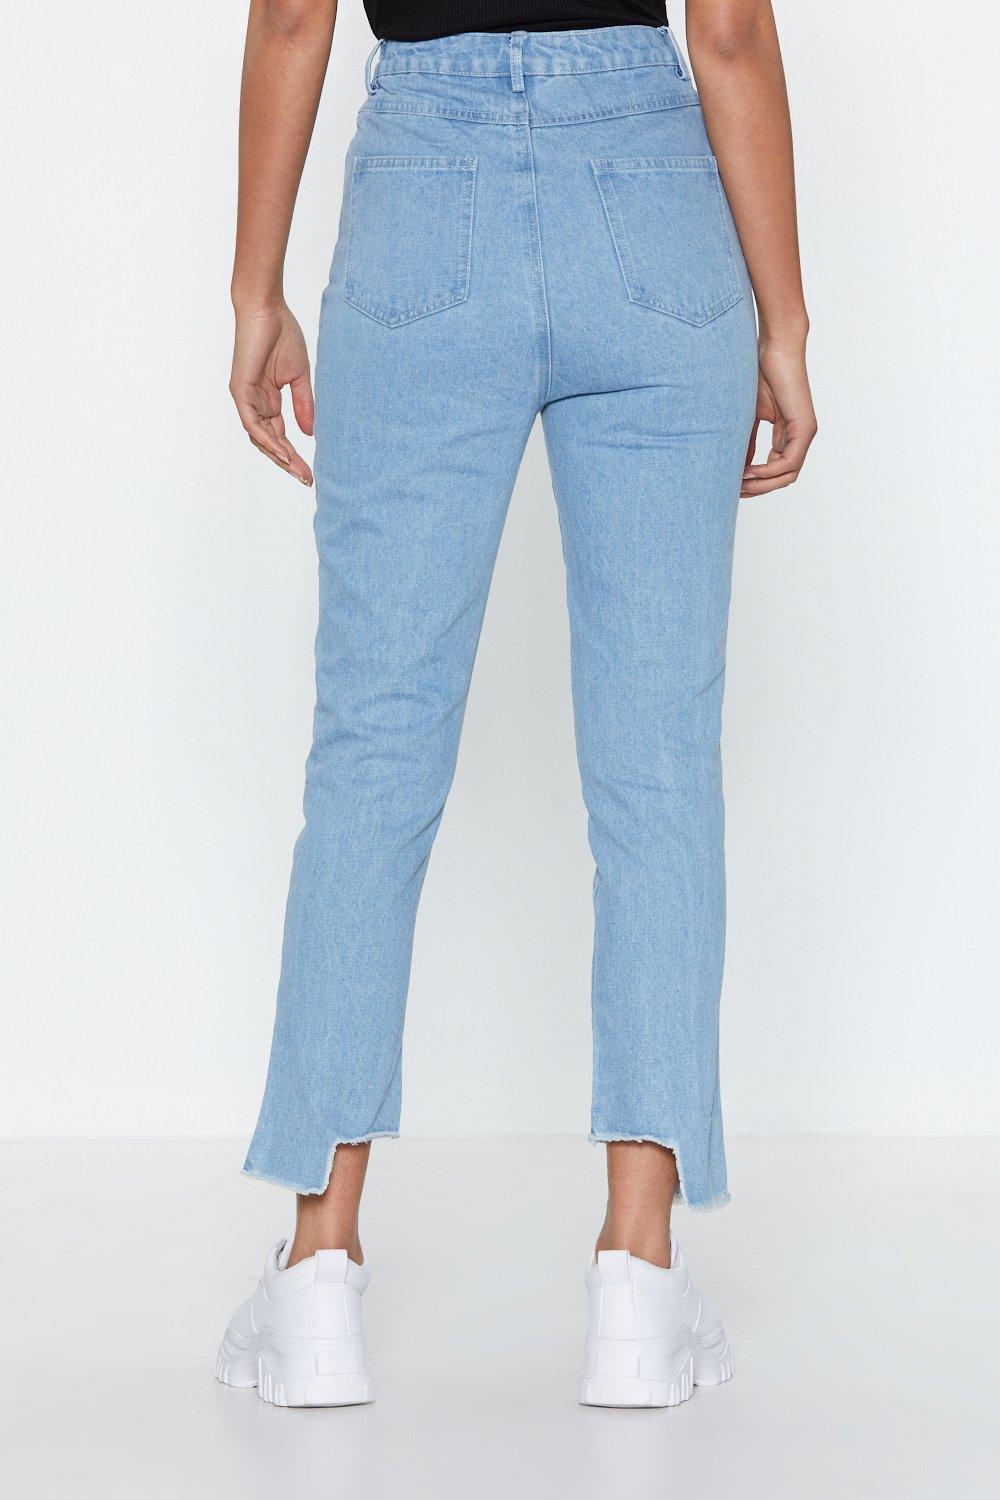 loose end jeans